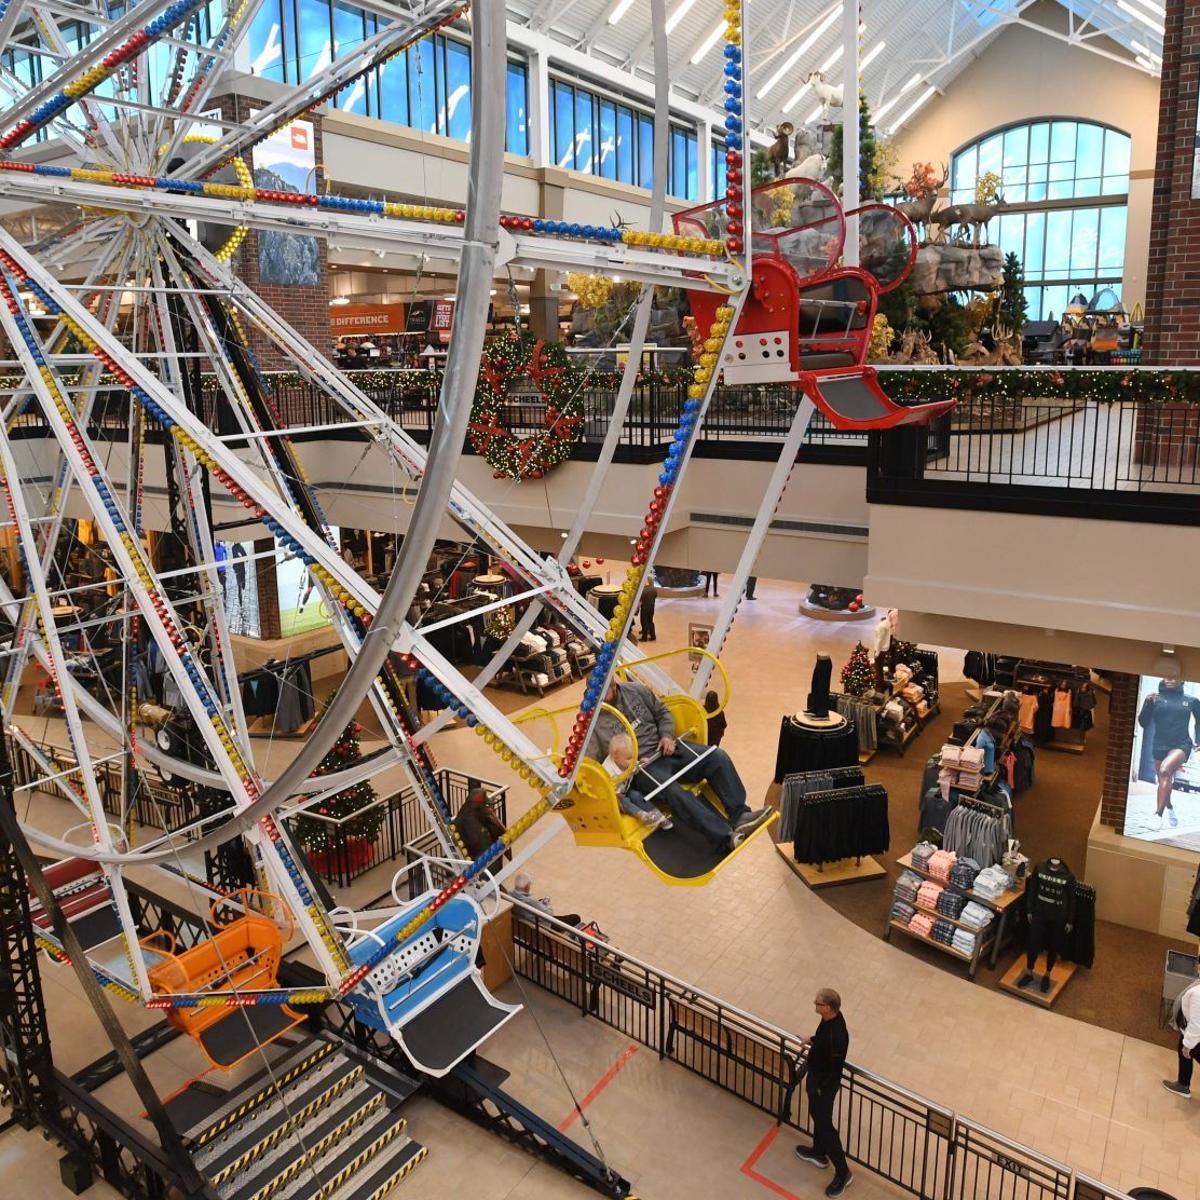 Scheels gains final approval for $16.2 million tax incentive to